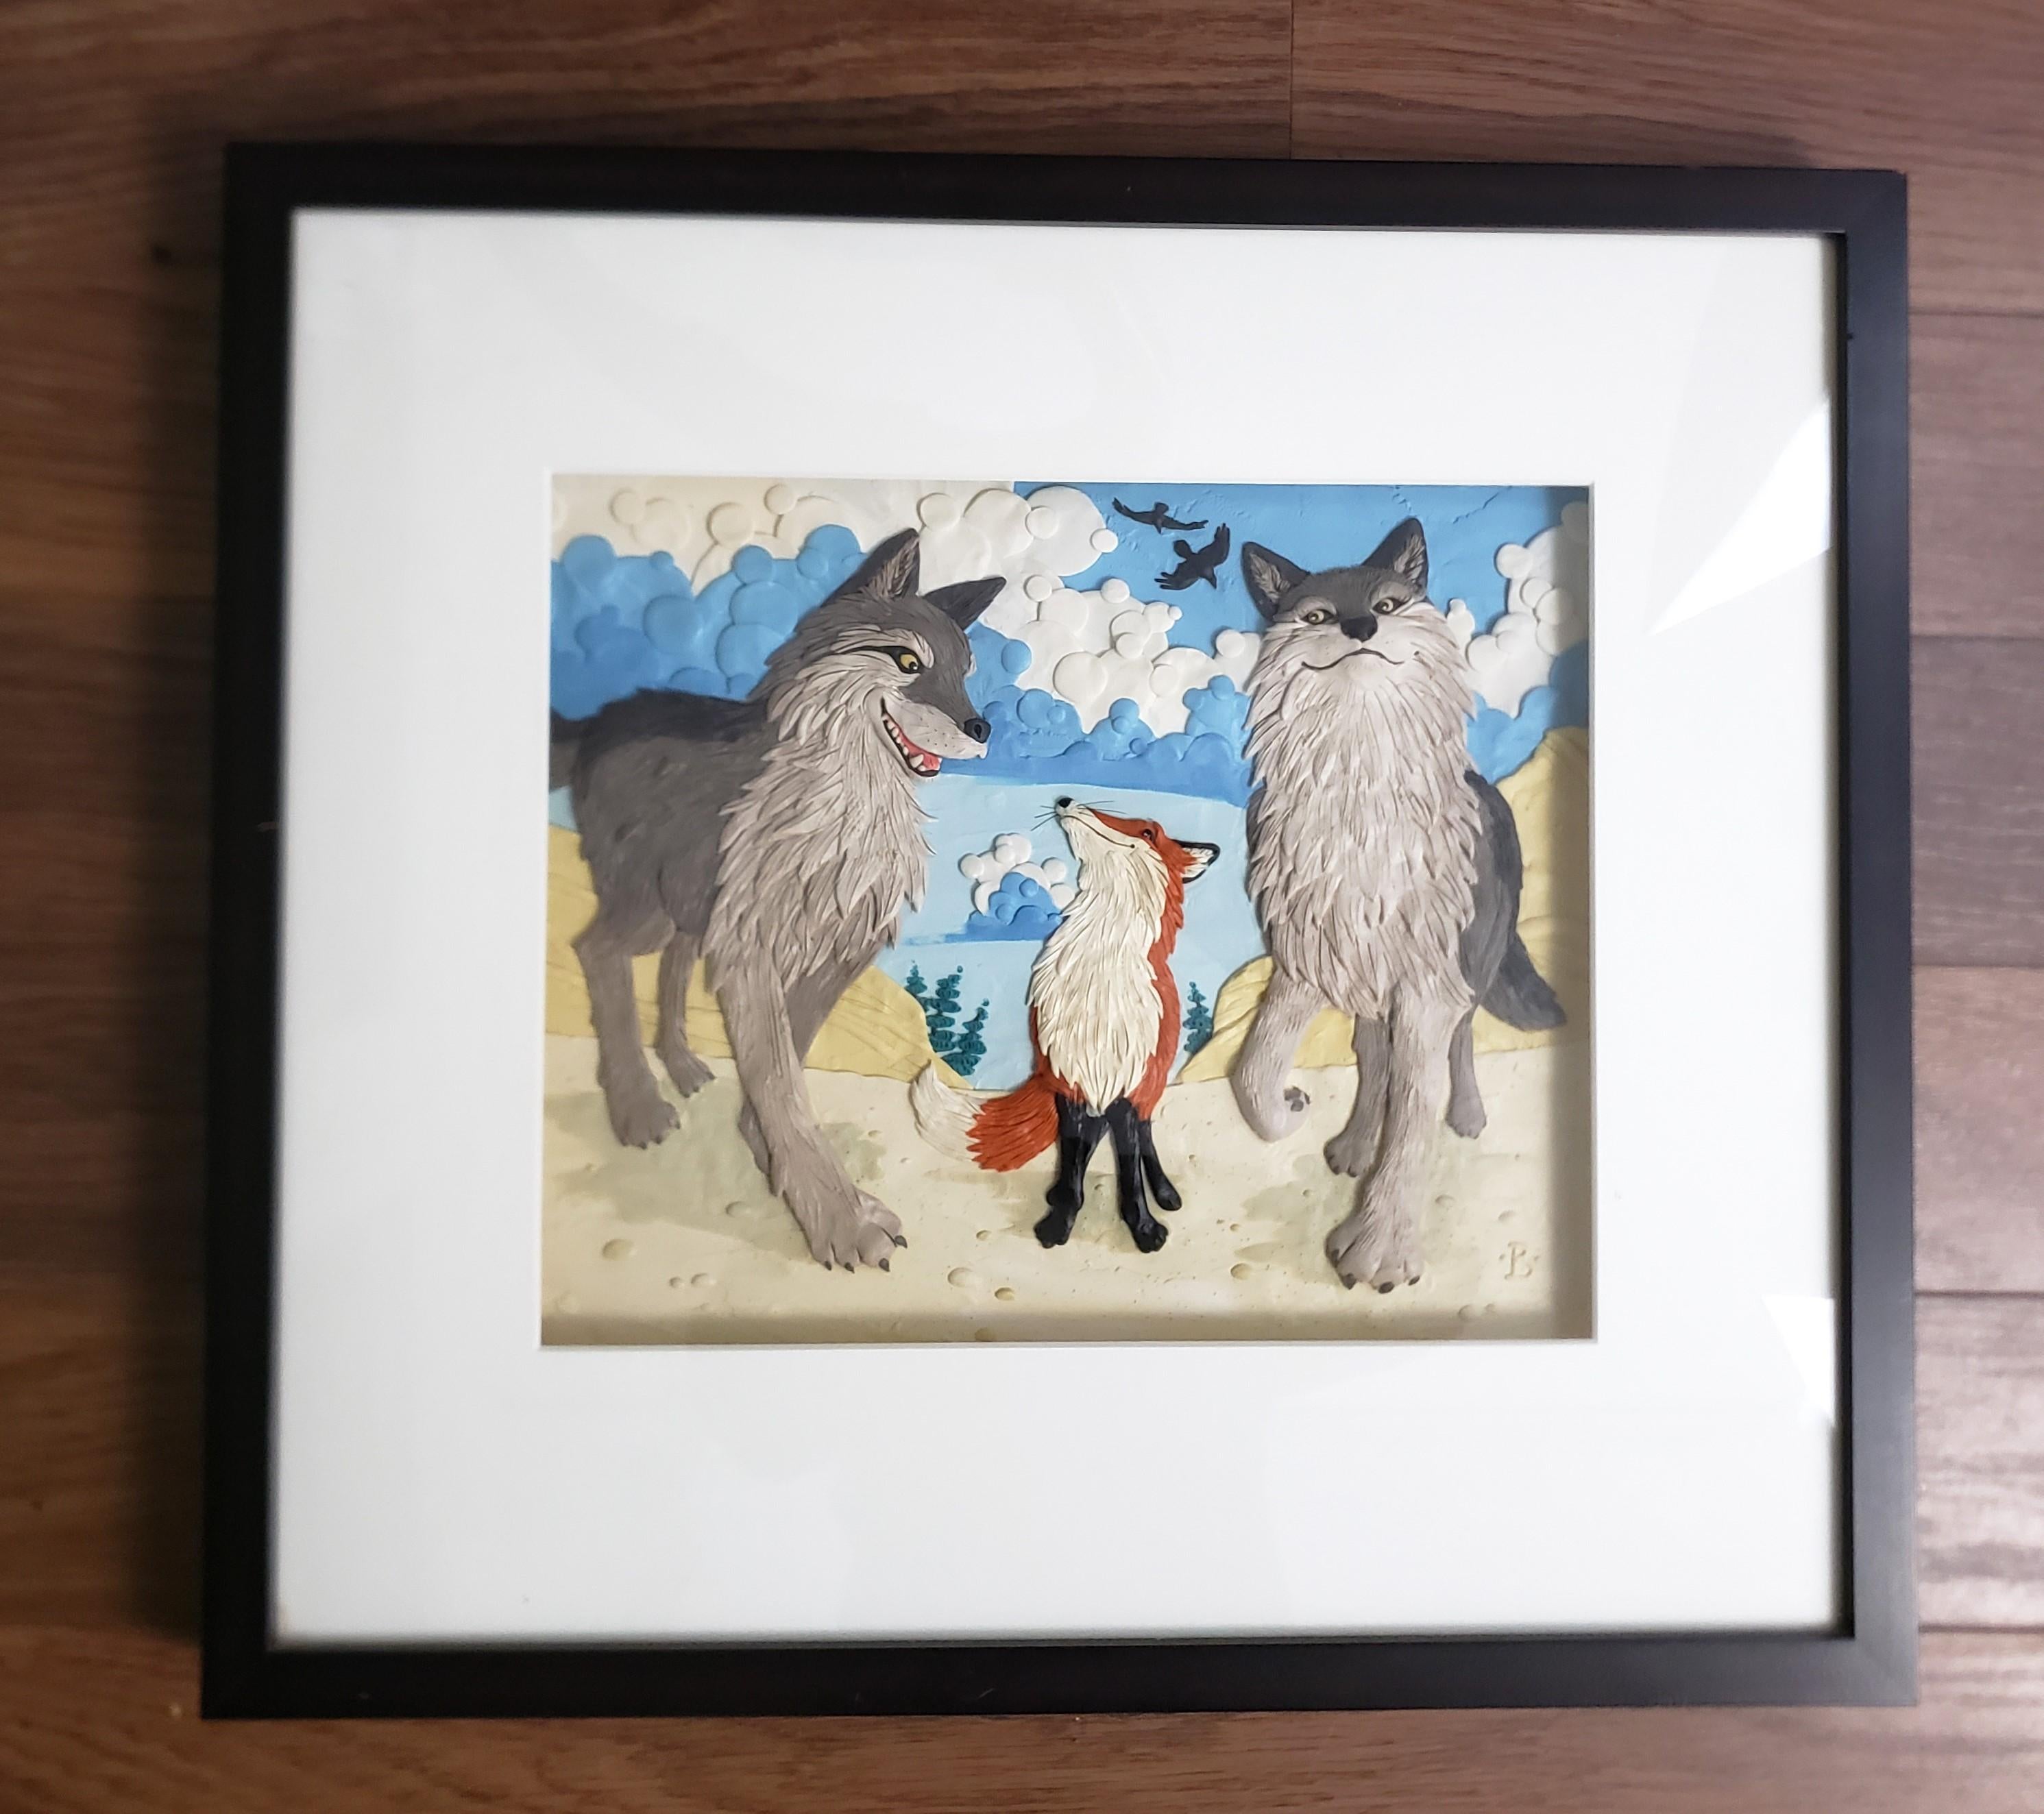 This sculptural panel was done by the well known child's book author and illustrator, Barbara Reid in 2006 in her signature style. This is an original sculpture done with plasticine, an oil based clay, and professionally framed in a shadow box. The